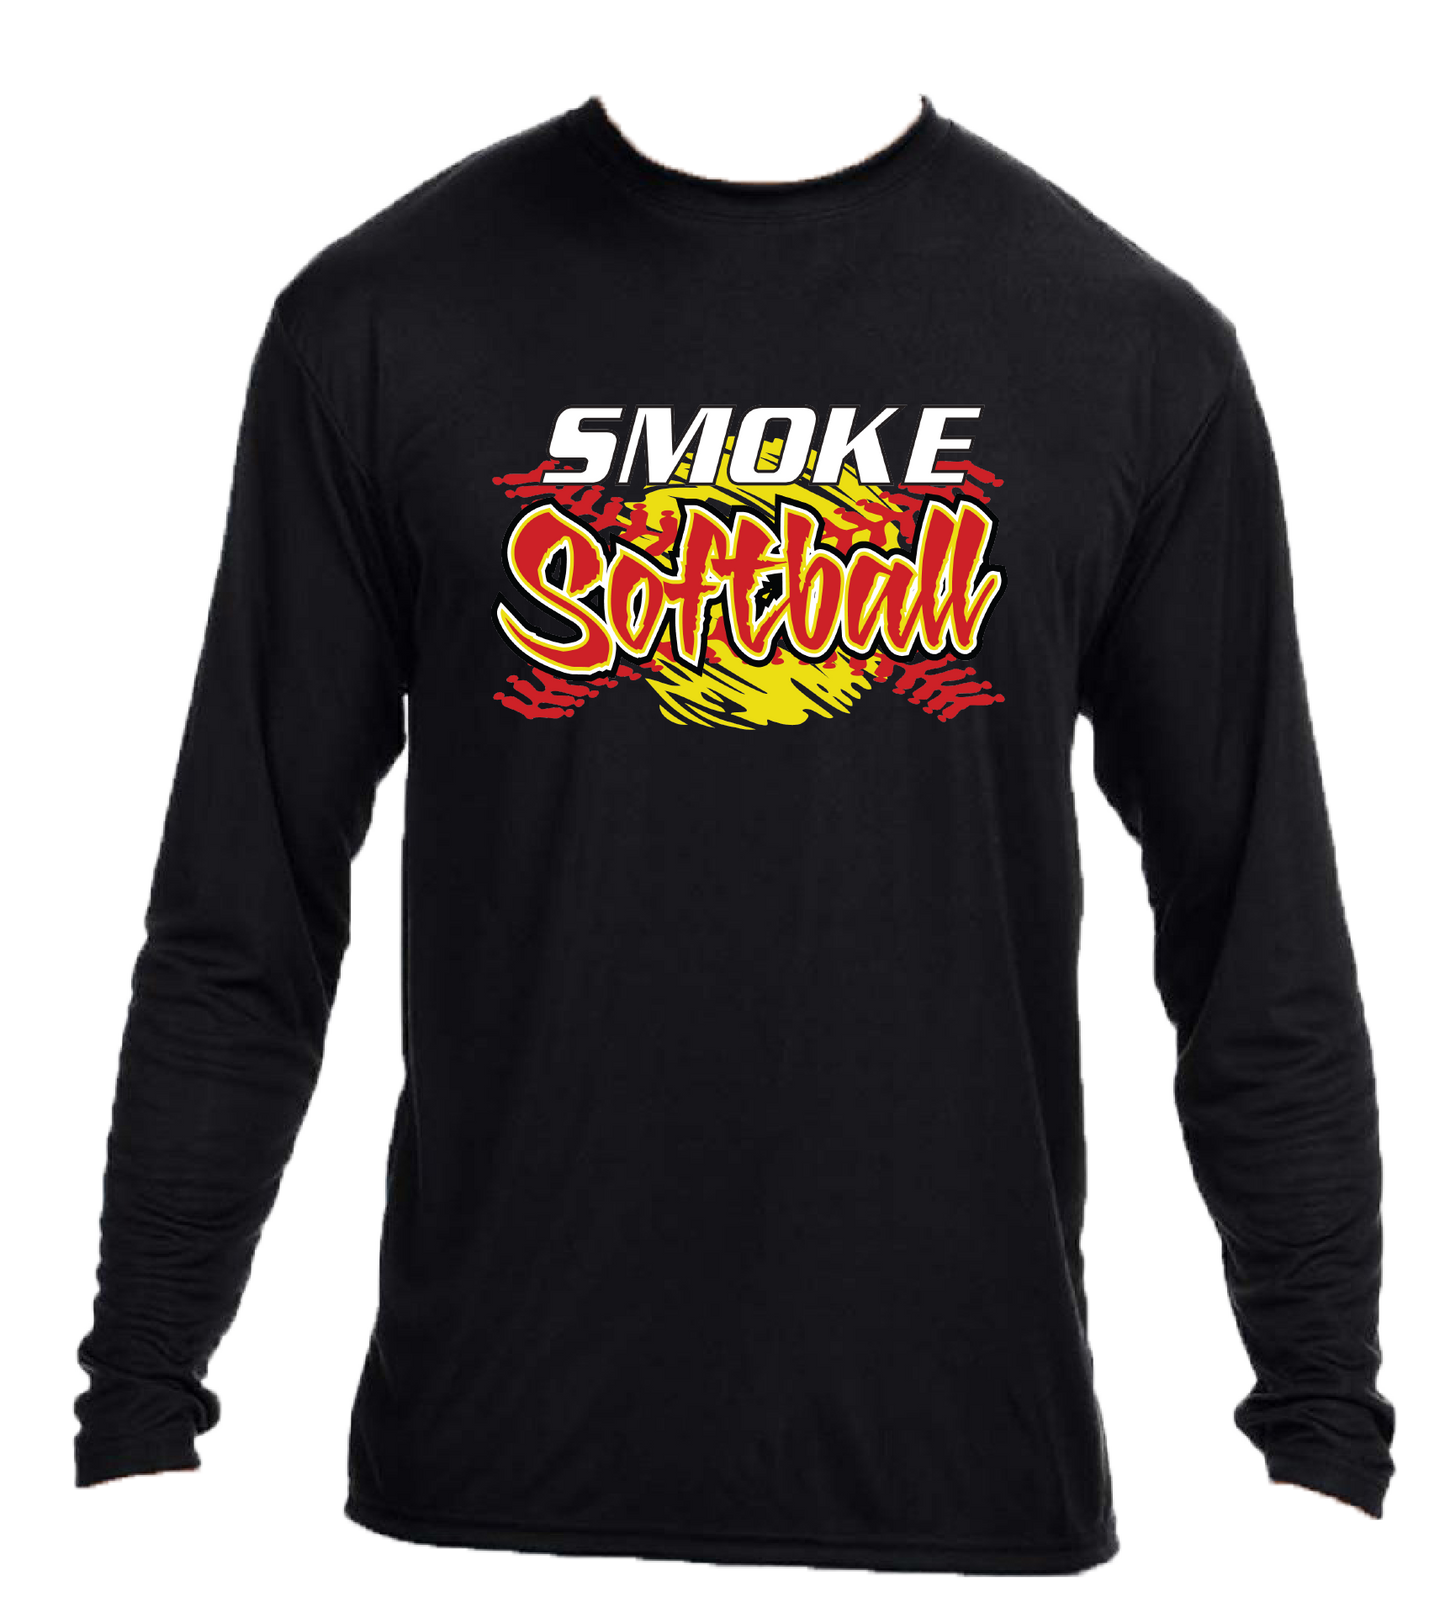 Oklahoma Smoke Youth Long Sleeve Dri Fit - Pick Your Design and Color